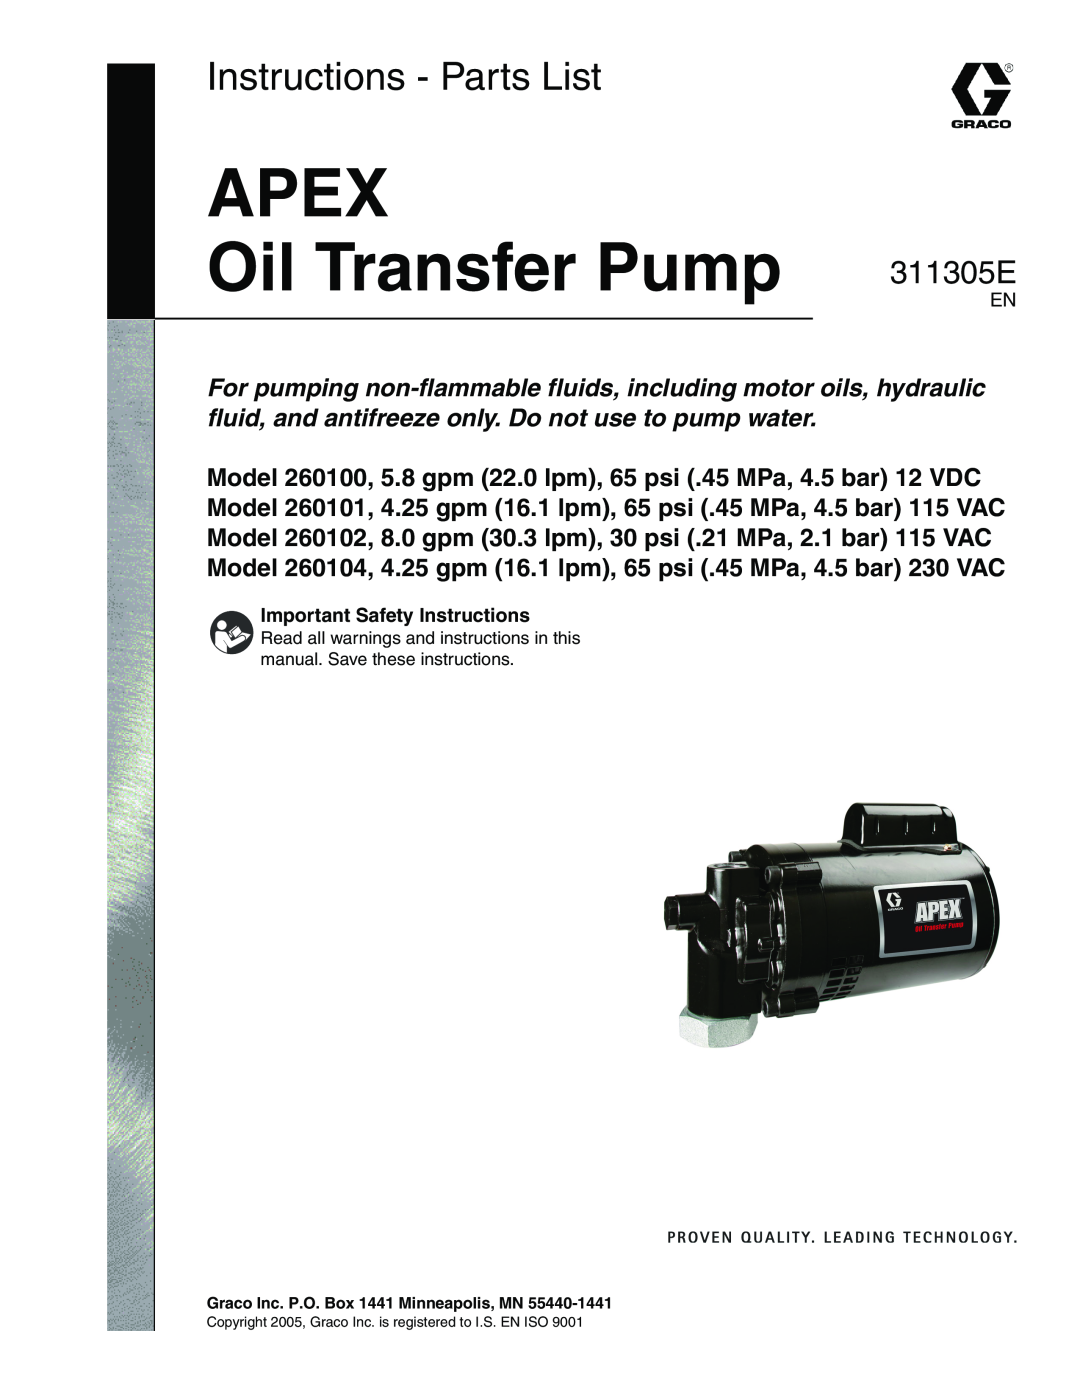 Graco Inc 260104, 260102, 260101 important safety instructions APEX Oil Transfer Pump, Instructions - Parts List, 311305E 